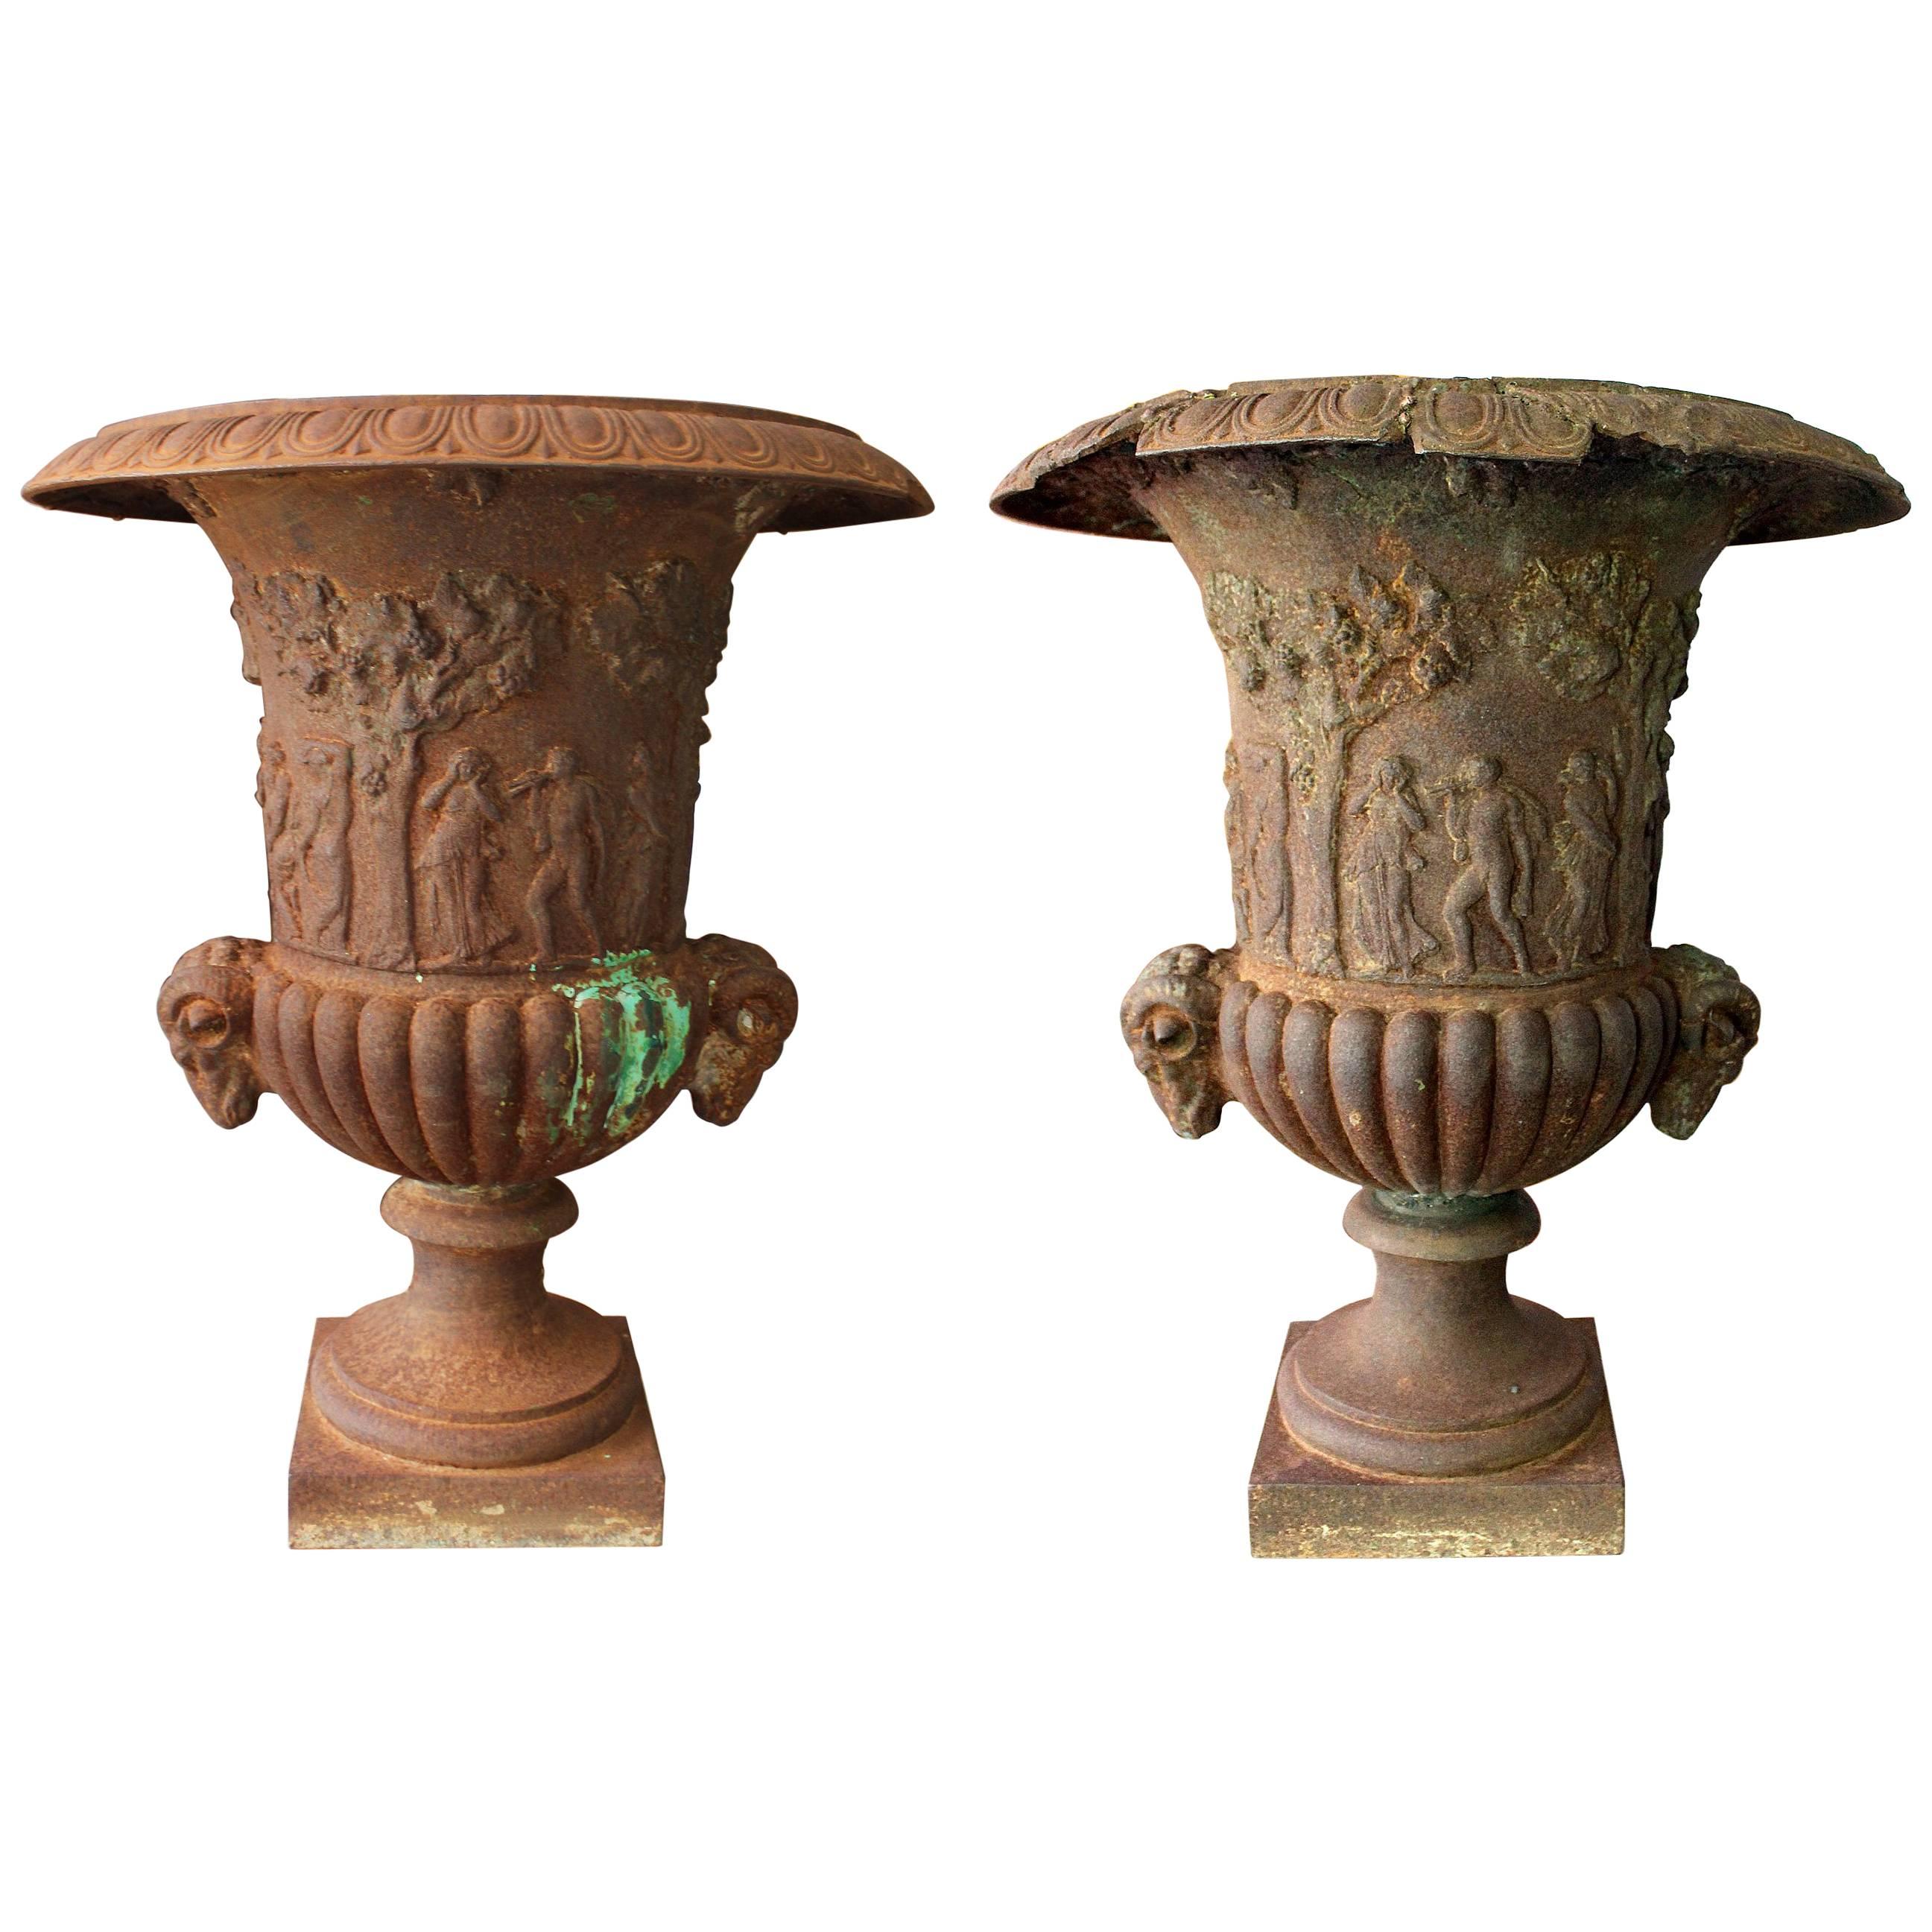 19th Century Pair of French Cast iron Planters